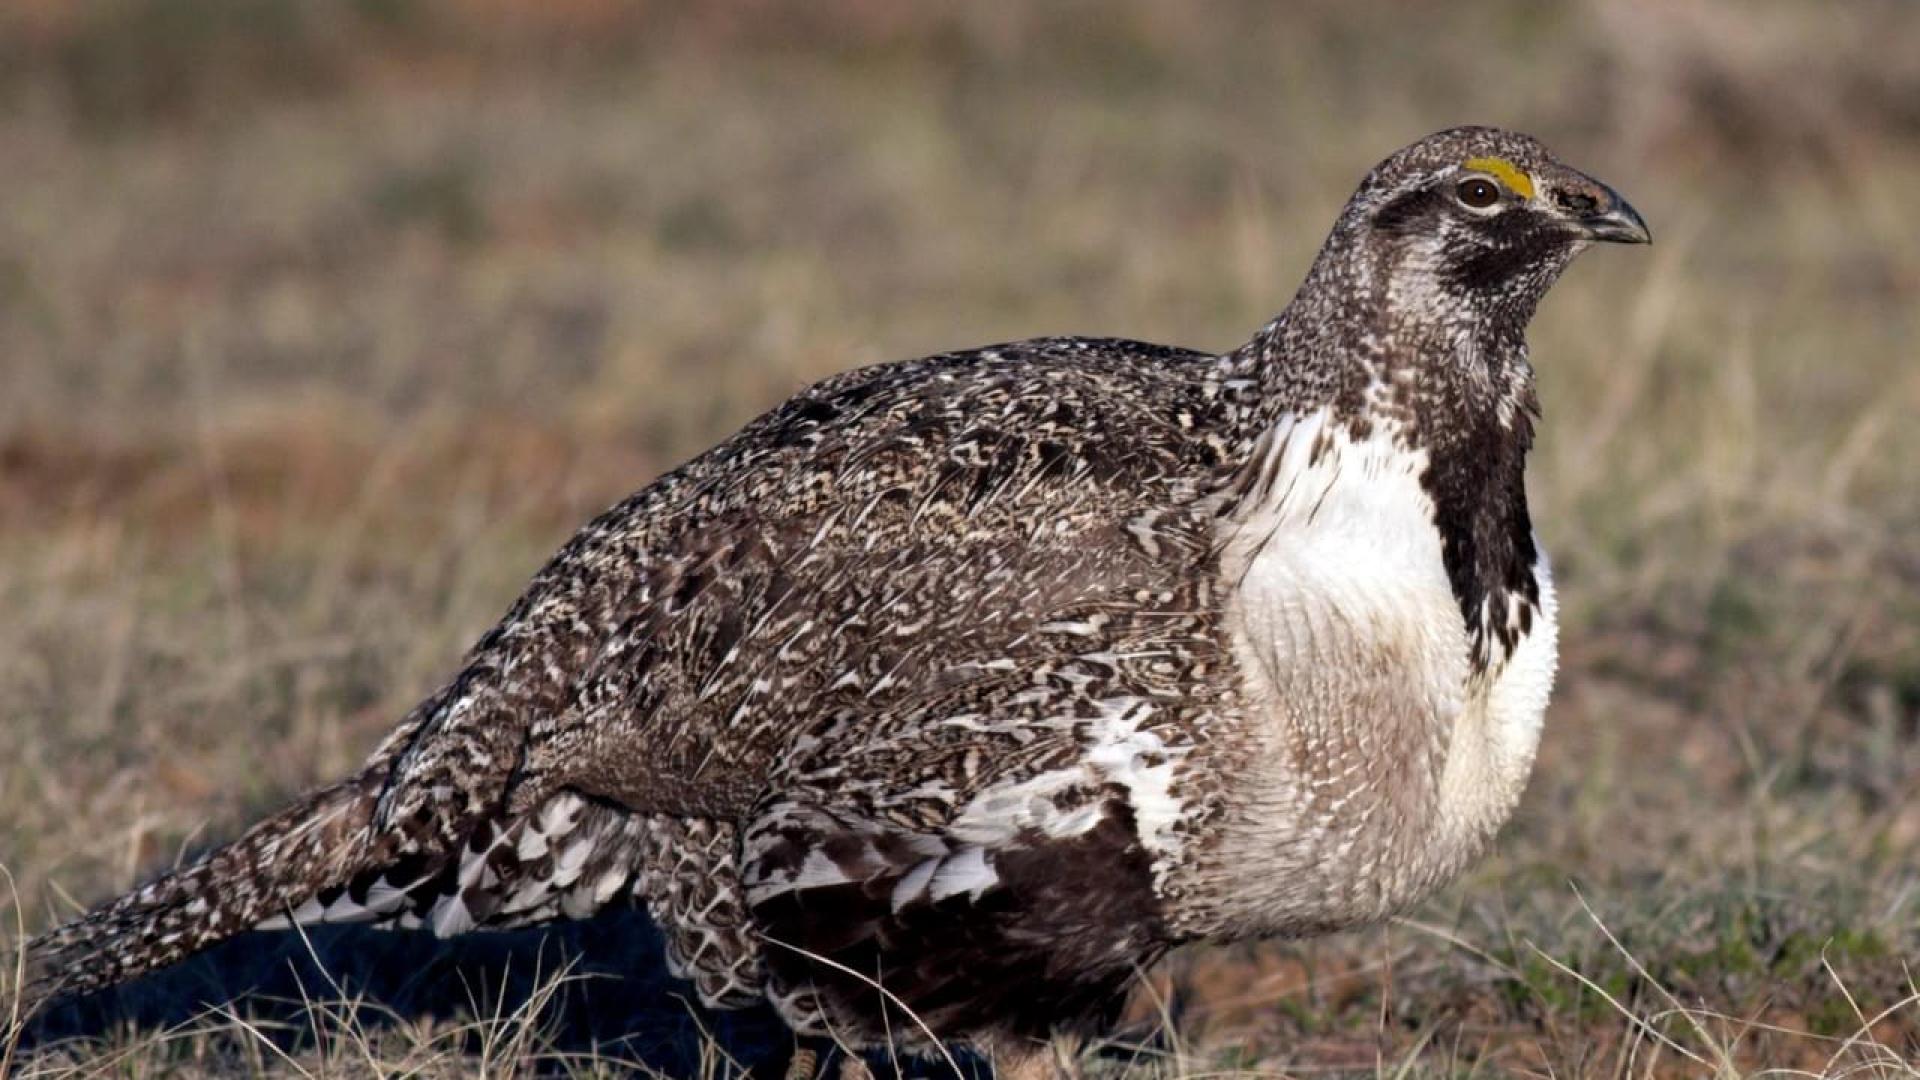 Male Greater Sage Grouse